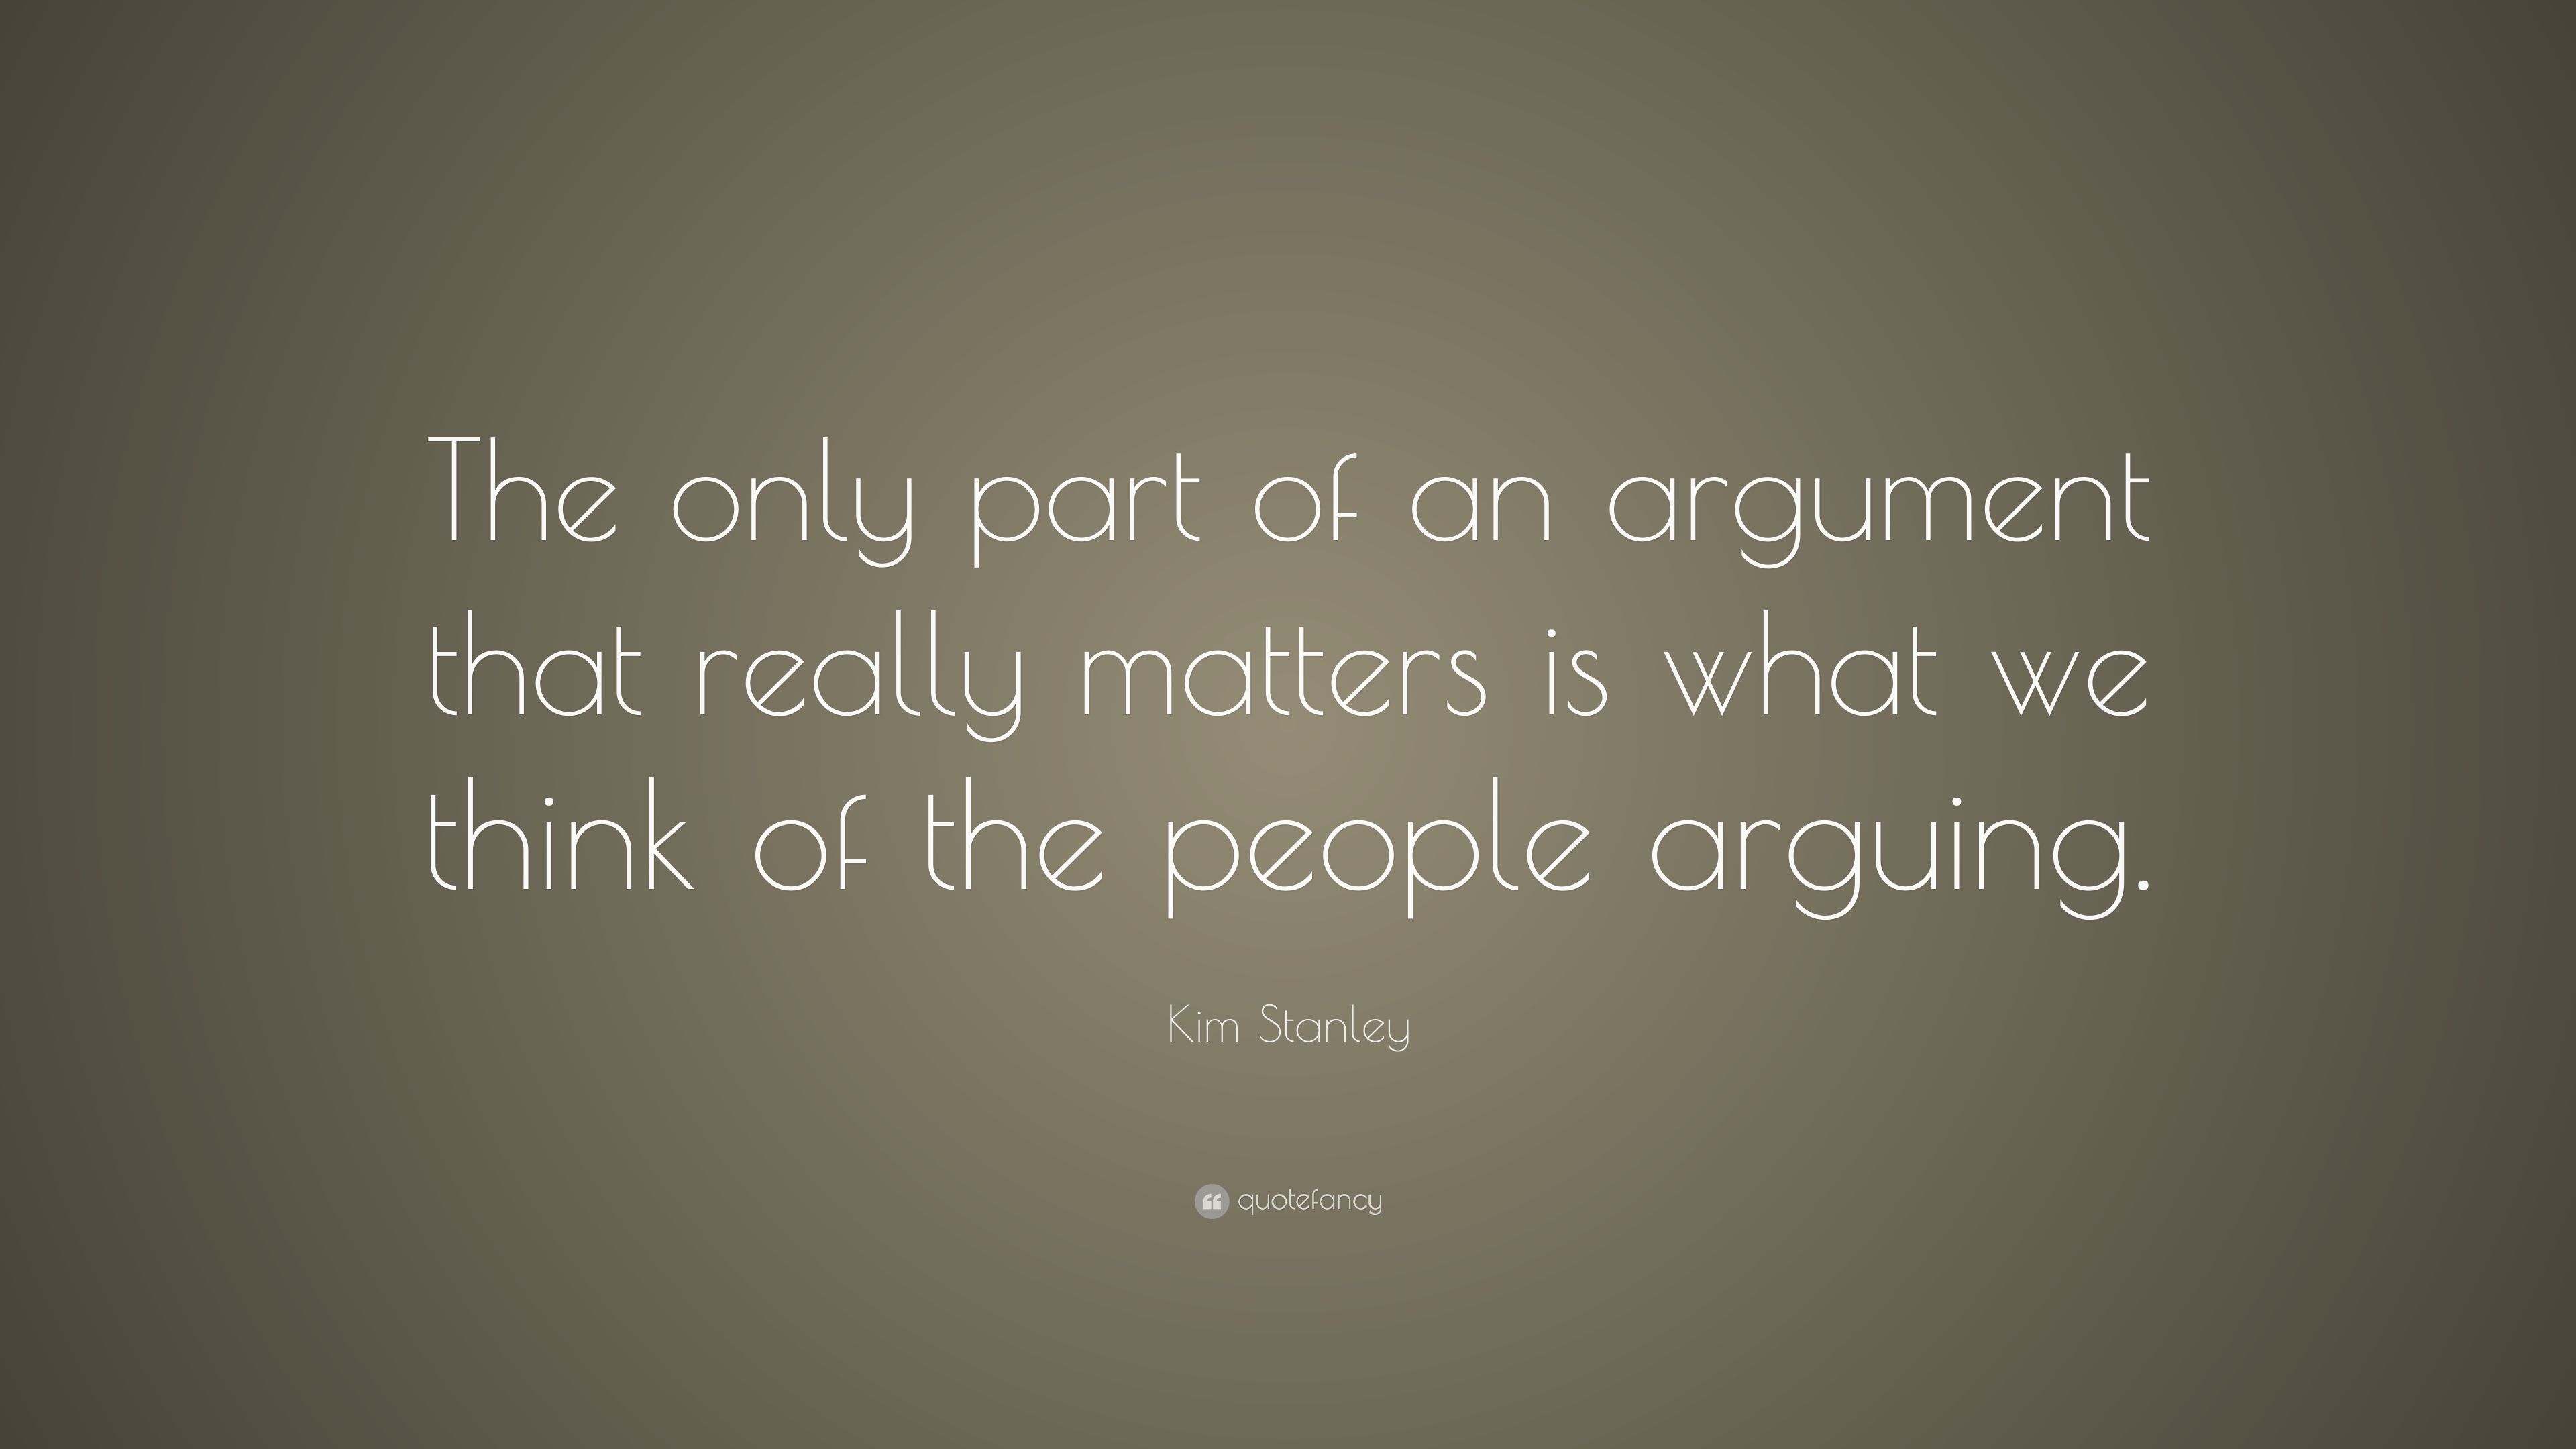 Kim Stanley Quote: “The only part of an argument that really